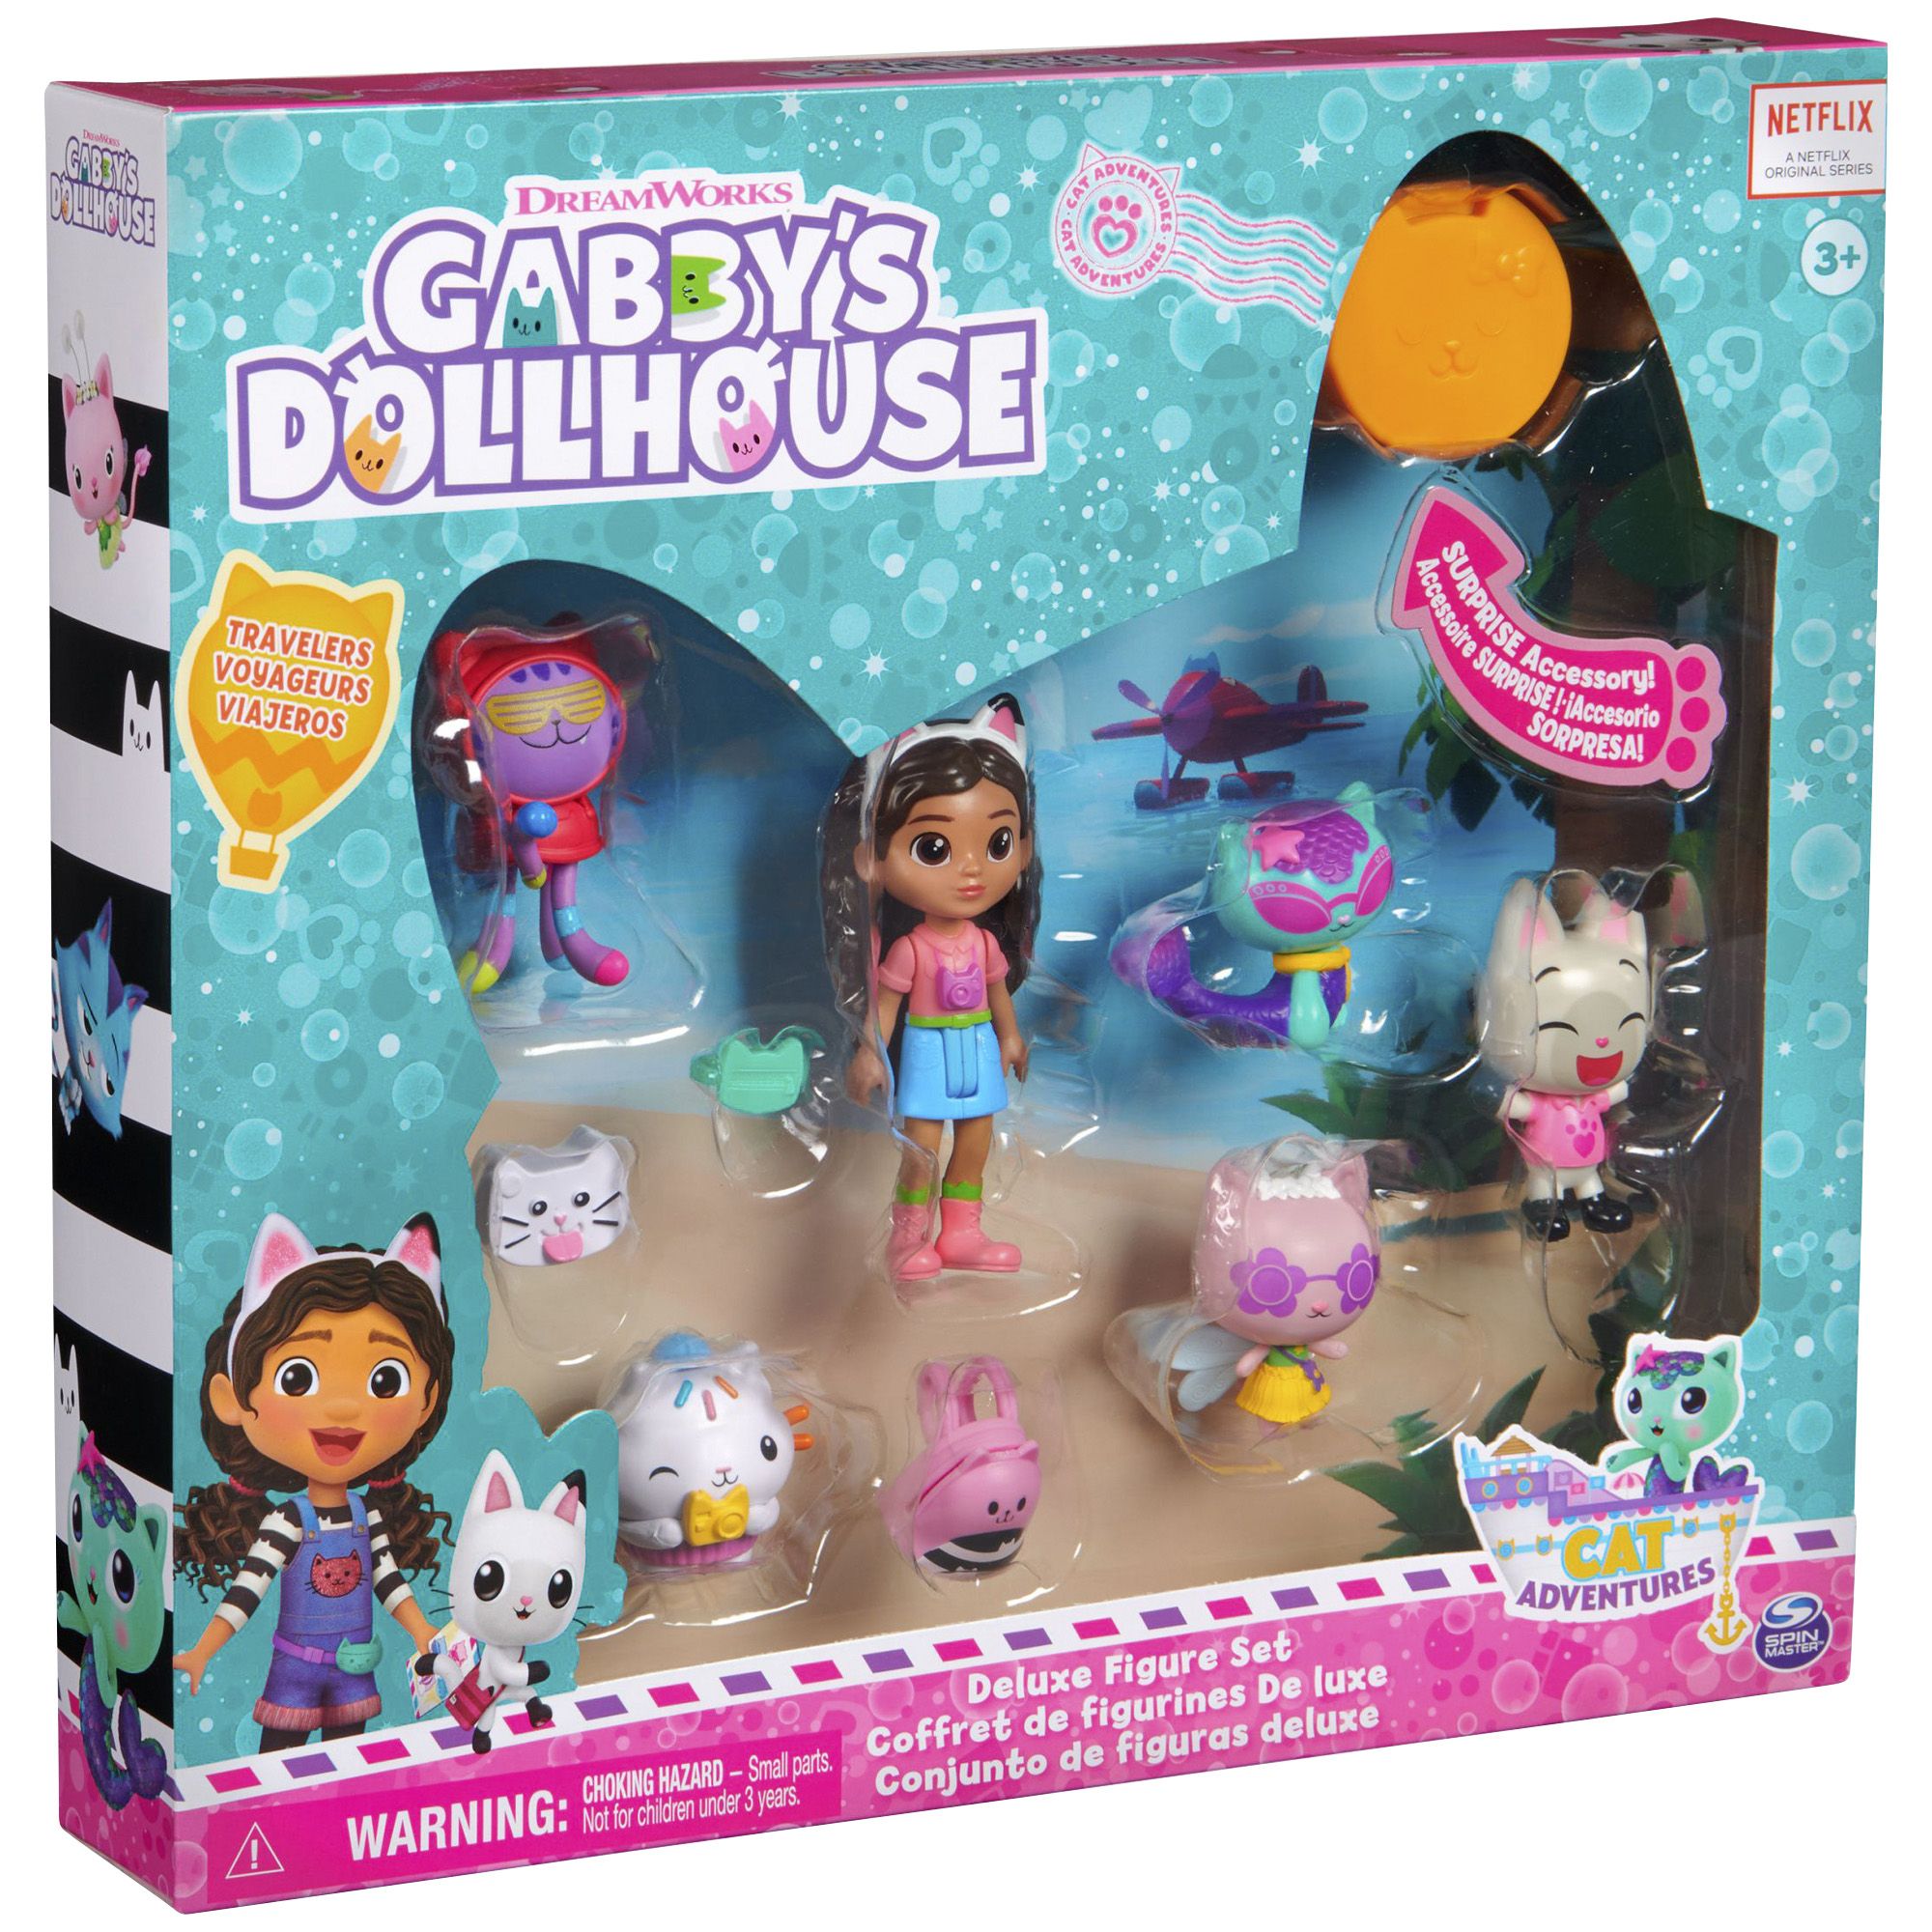 Gabby's Dollhouse Gabby and Friends Camping Figure Set